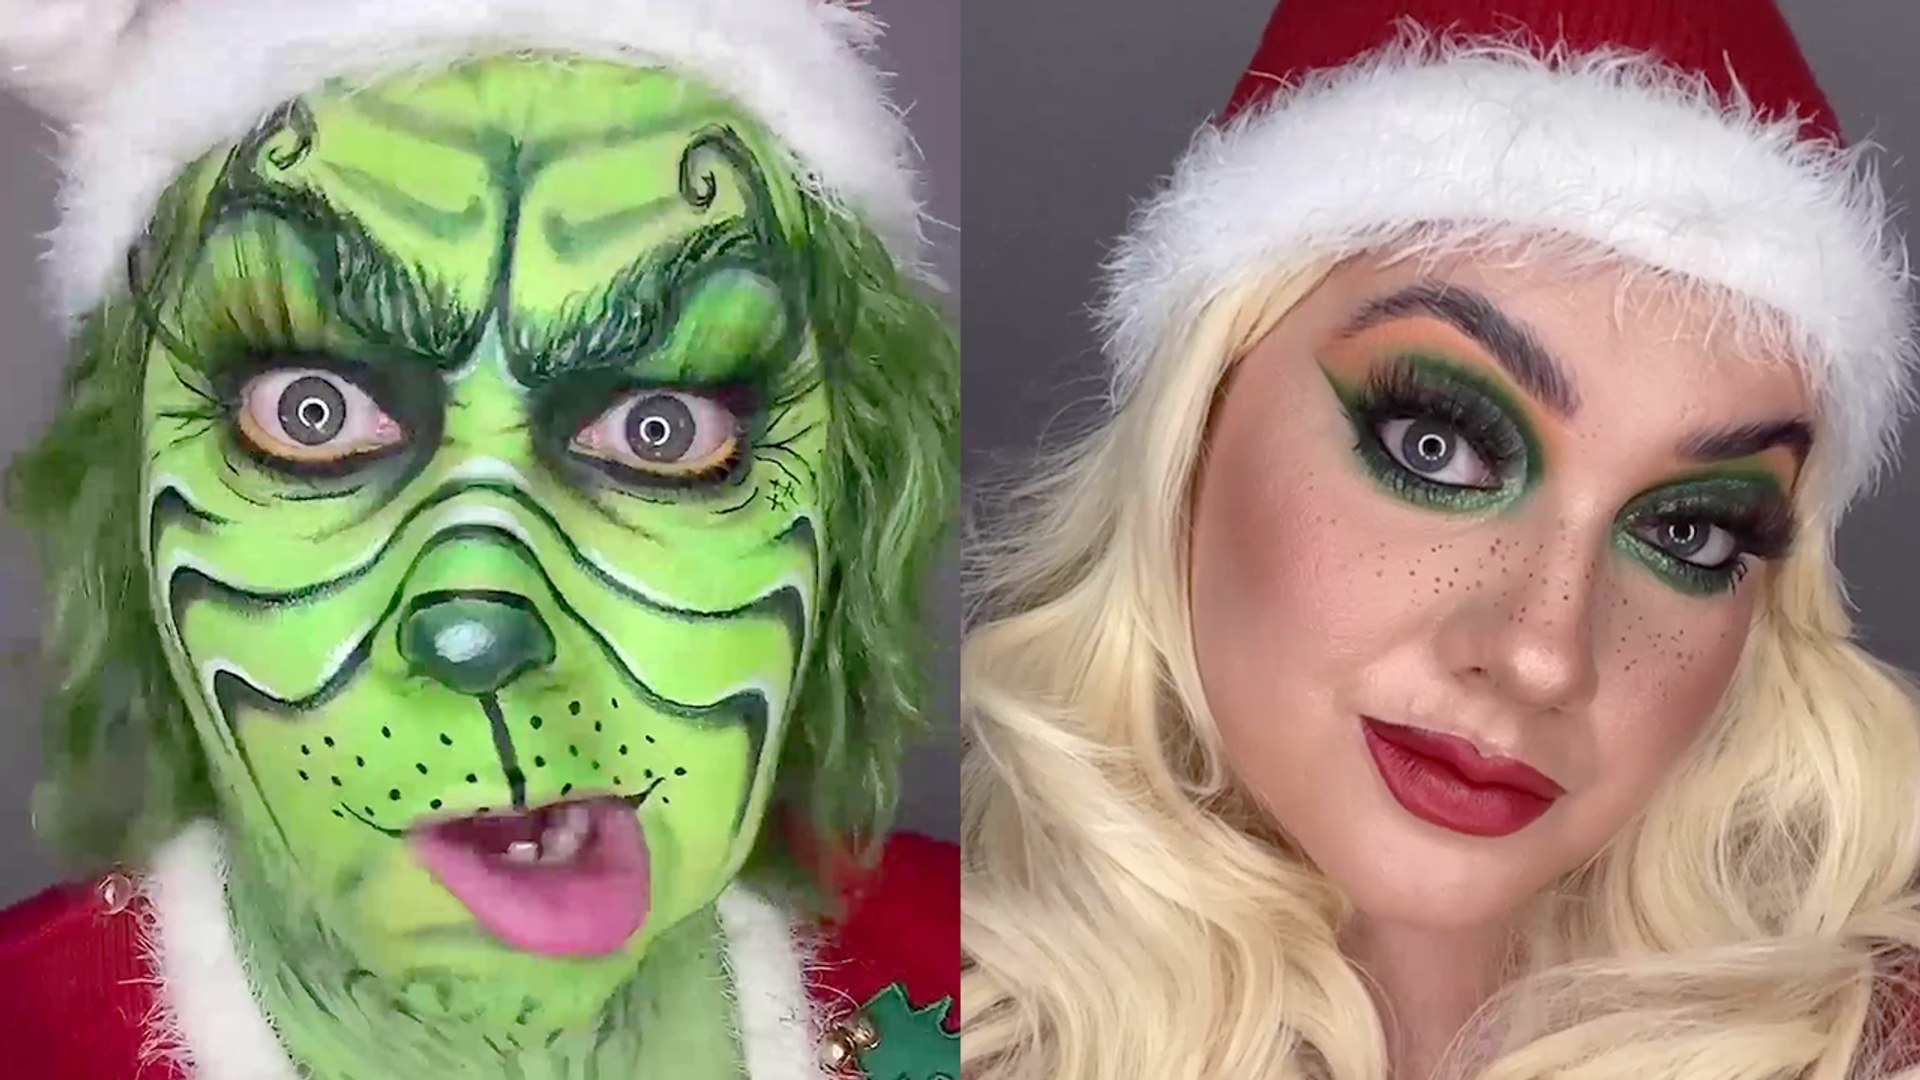 Makeup Artist/Shapeshifter Becomes The Grinch for Christmas' - video  Dailymotion